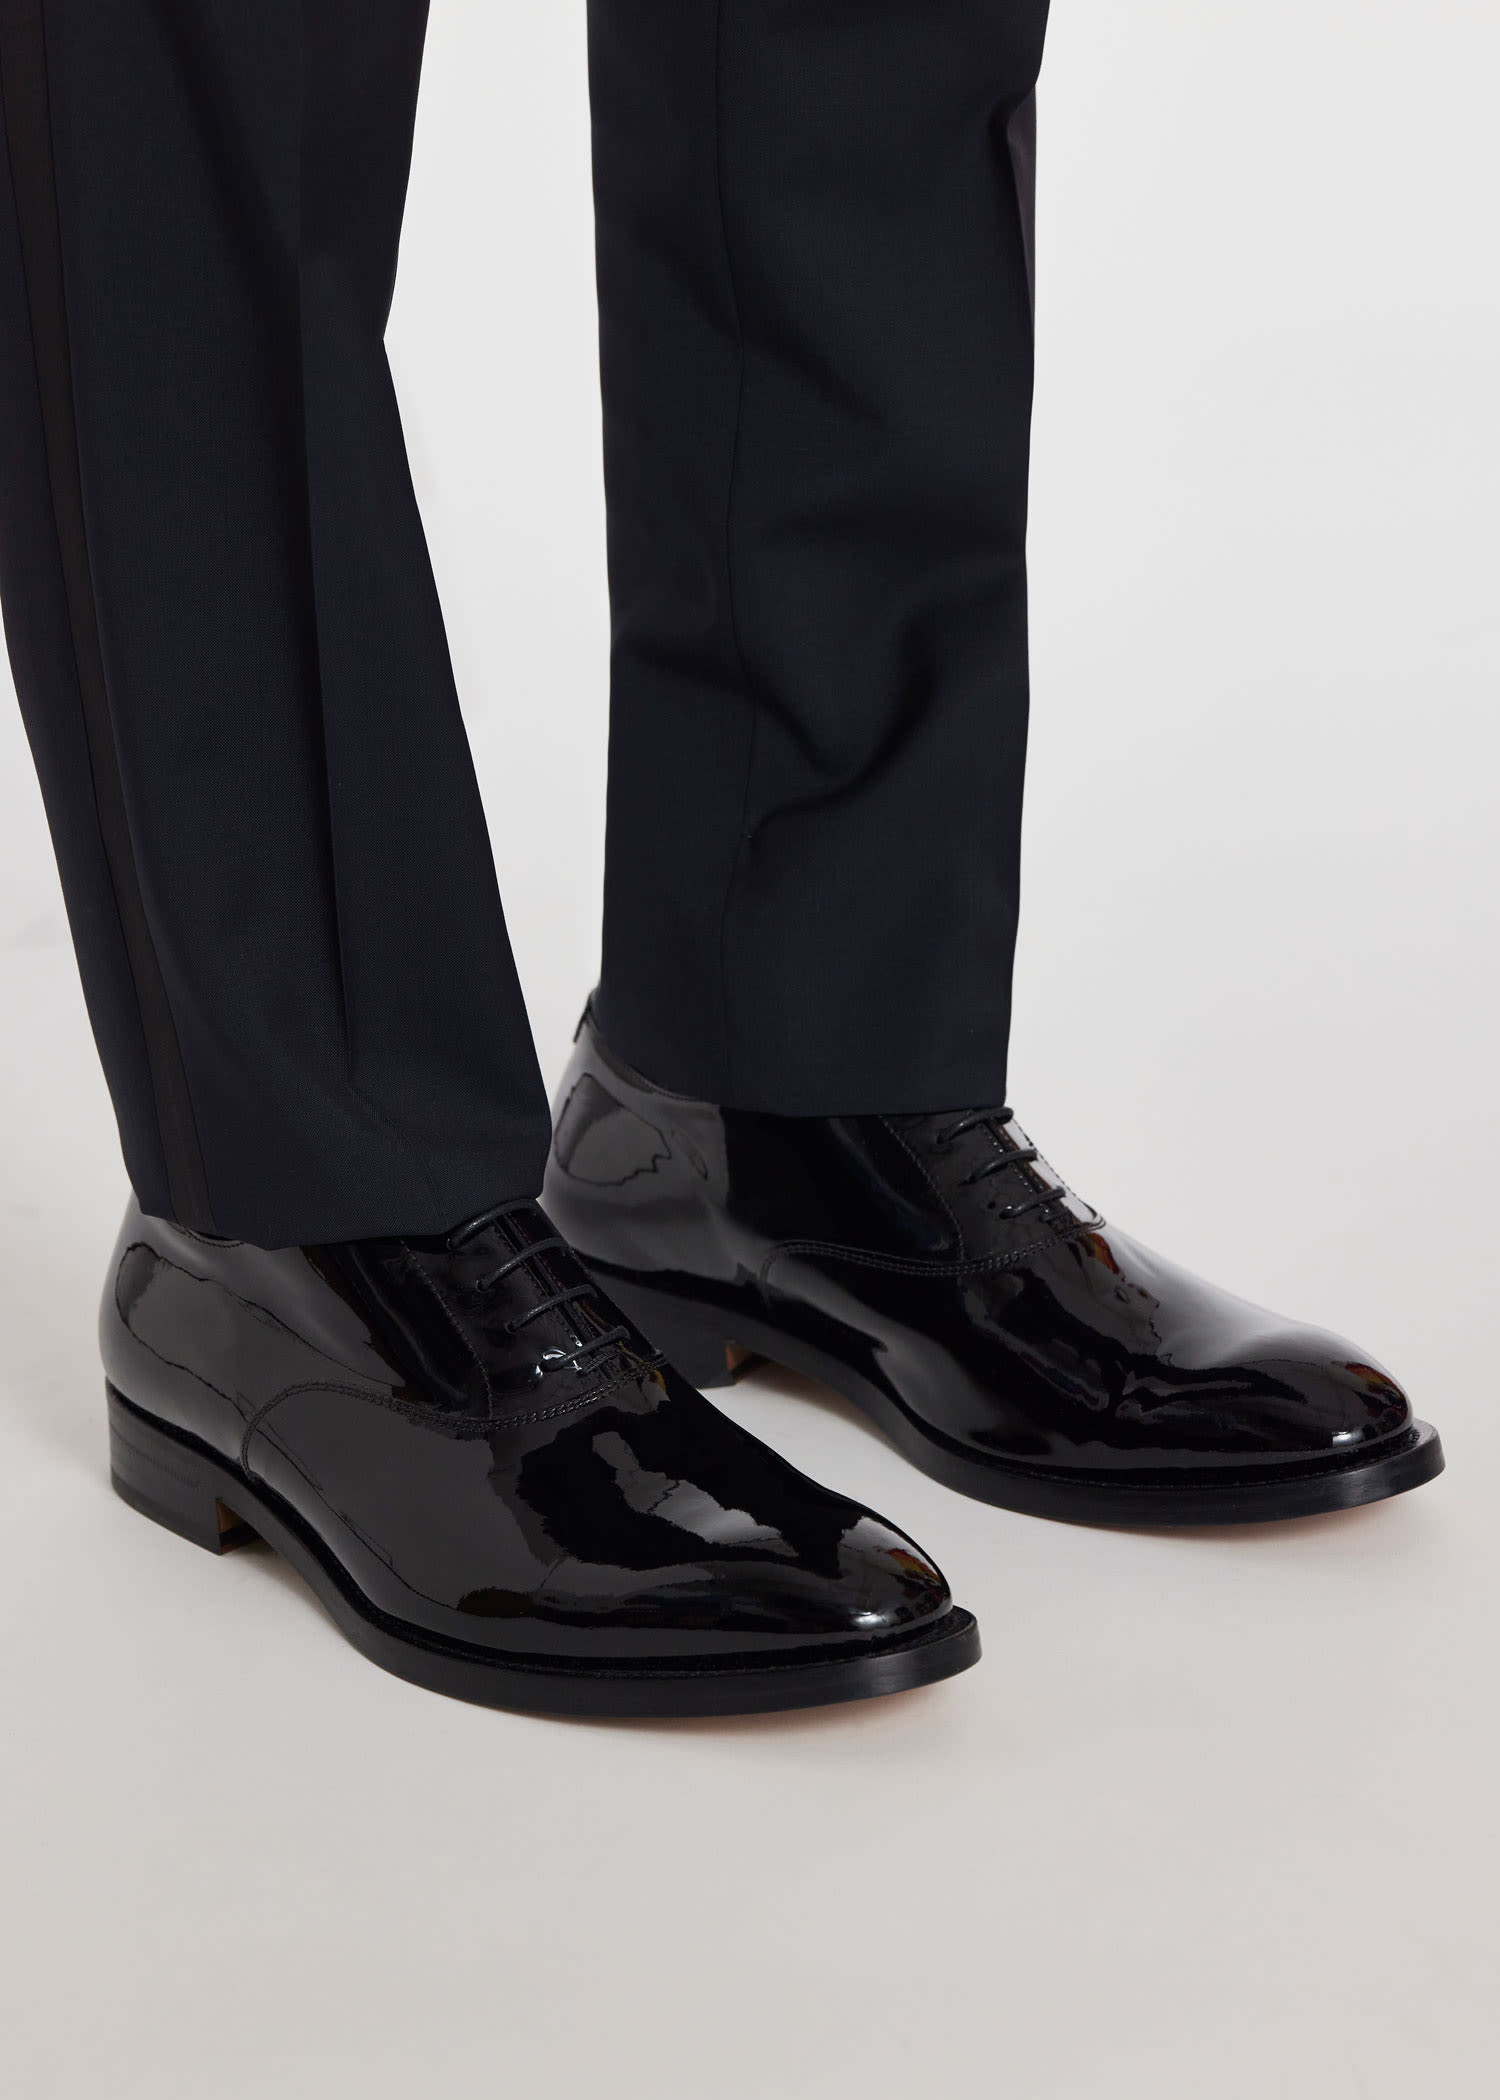 Black Patent Leather 'Gershwin' Shoes